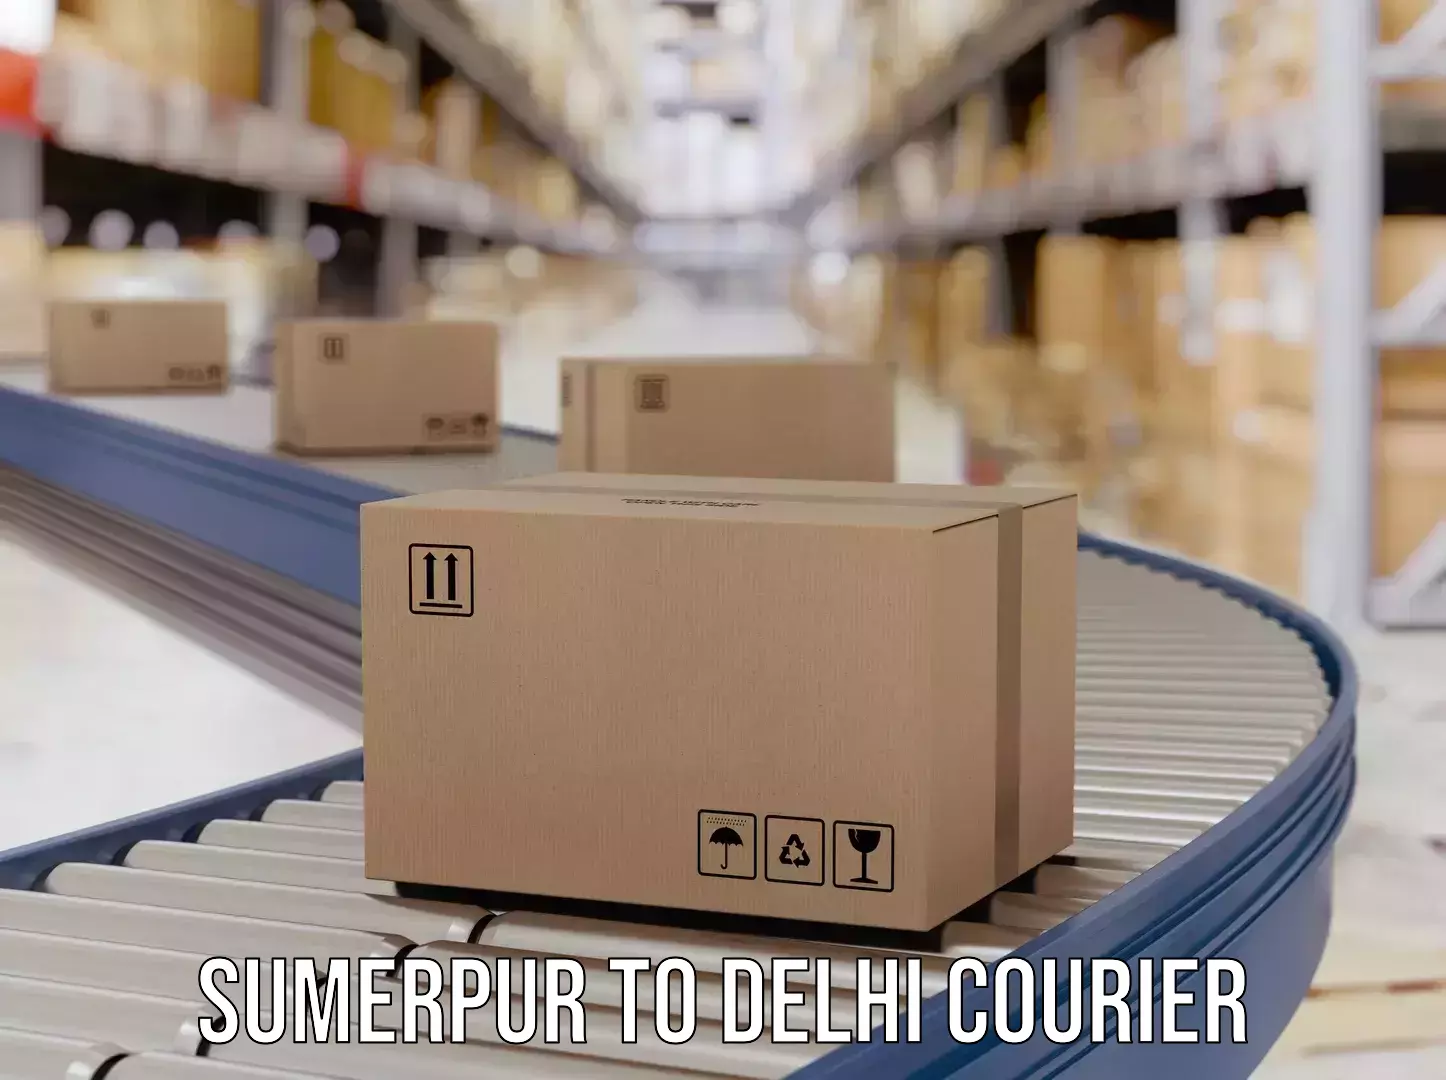 Multi-national courier services Sumerpur to University of Delhi